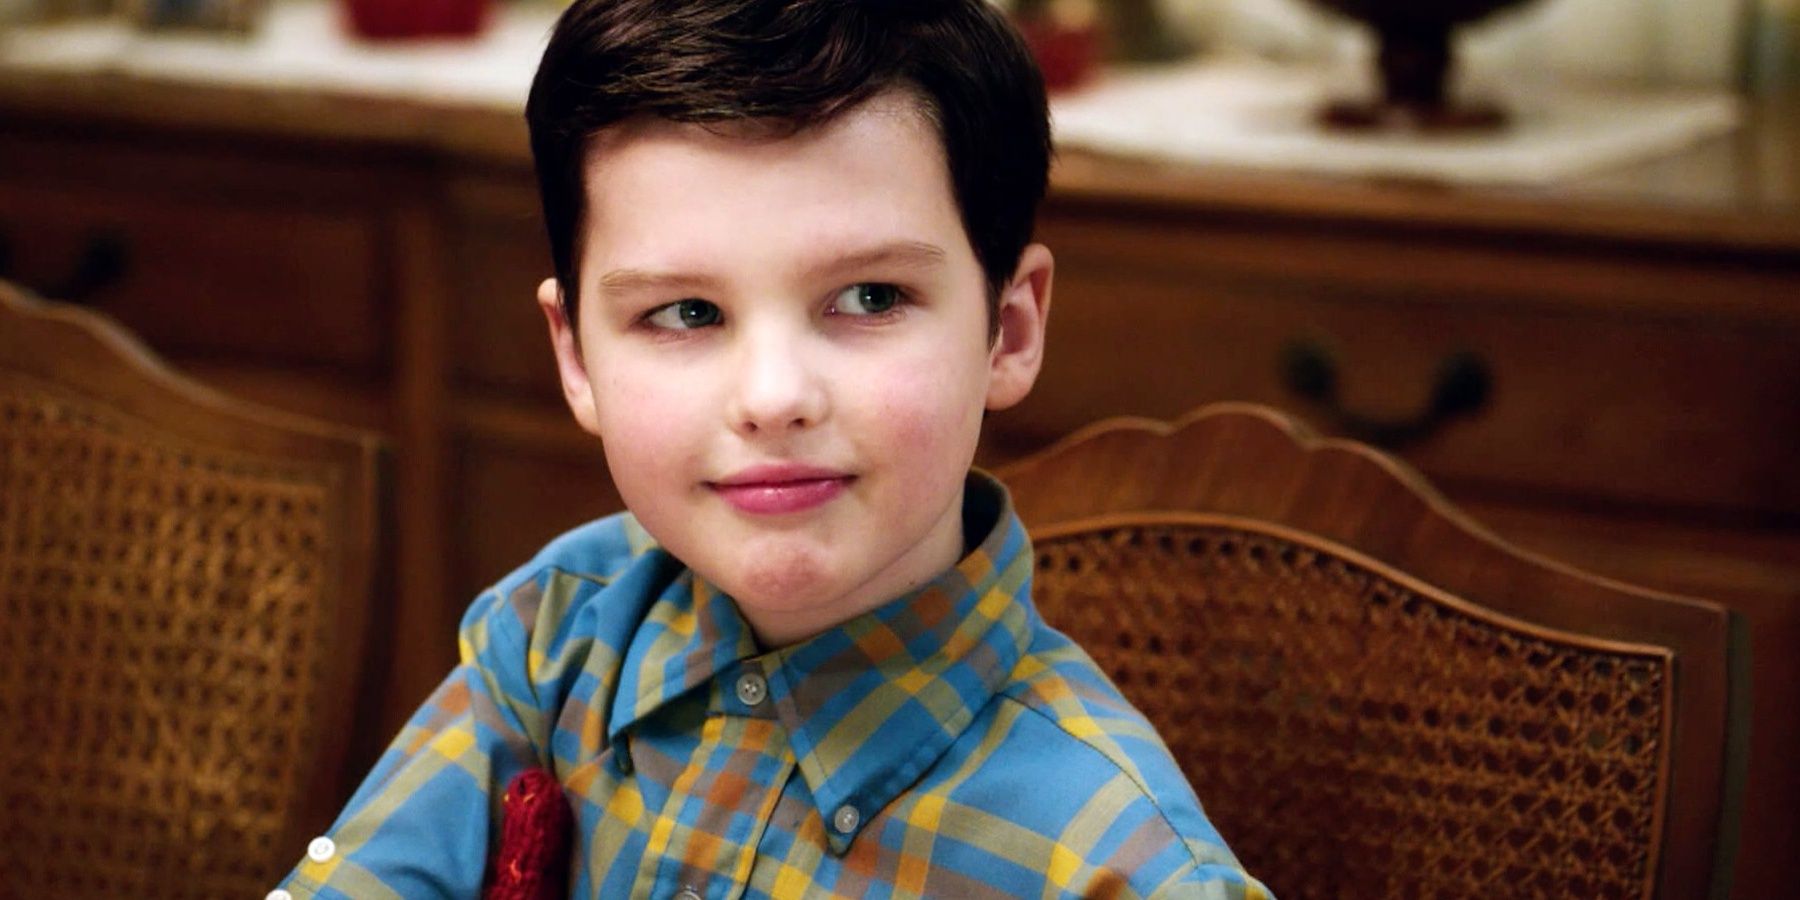 Young Sheldon Cooper close-up, slightly smiling